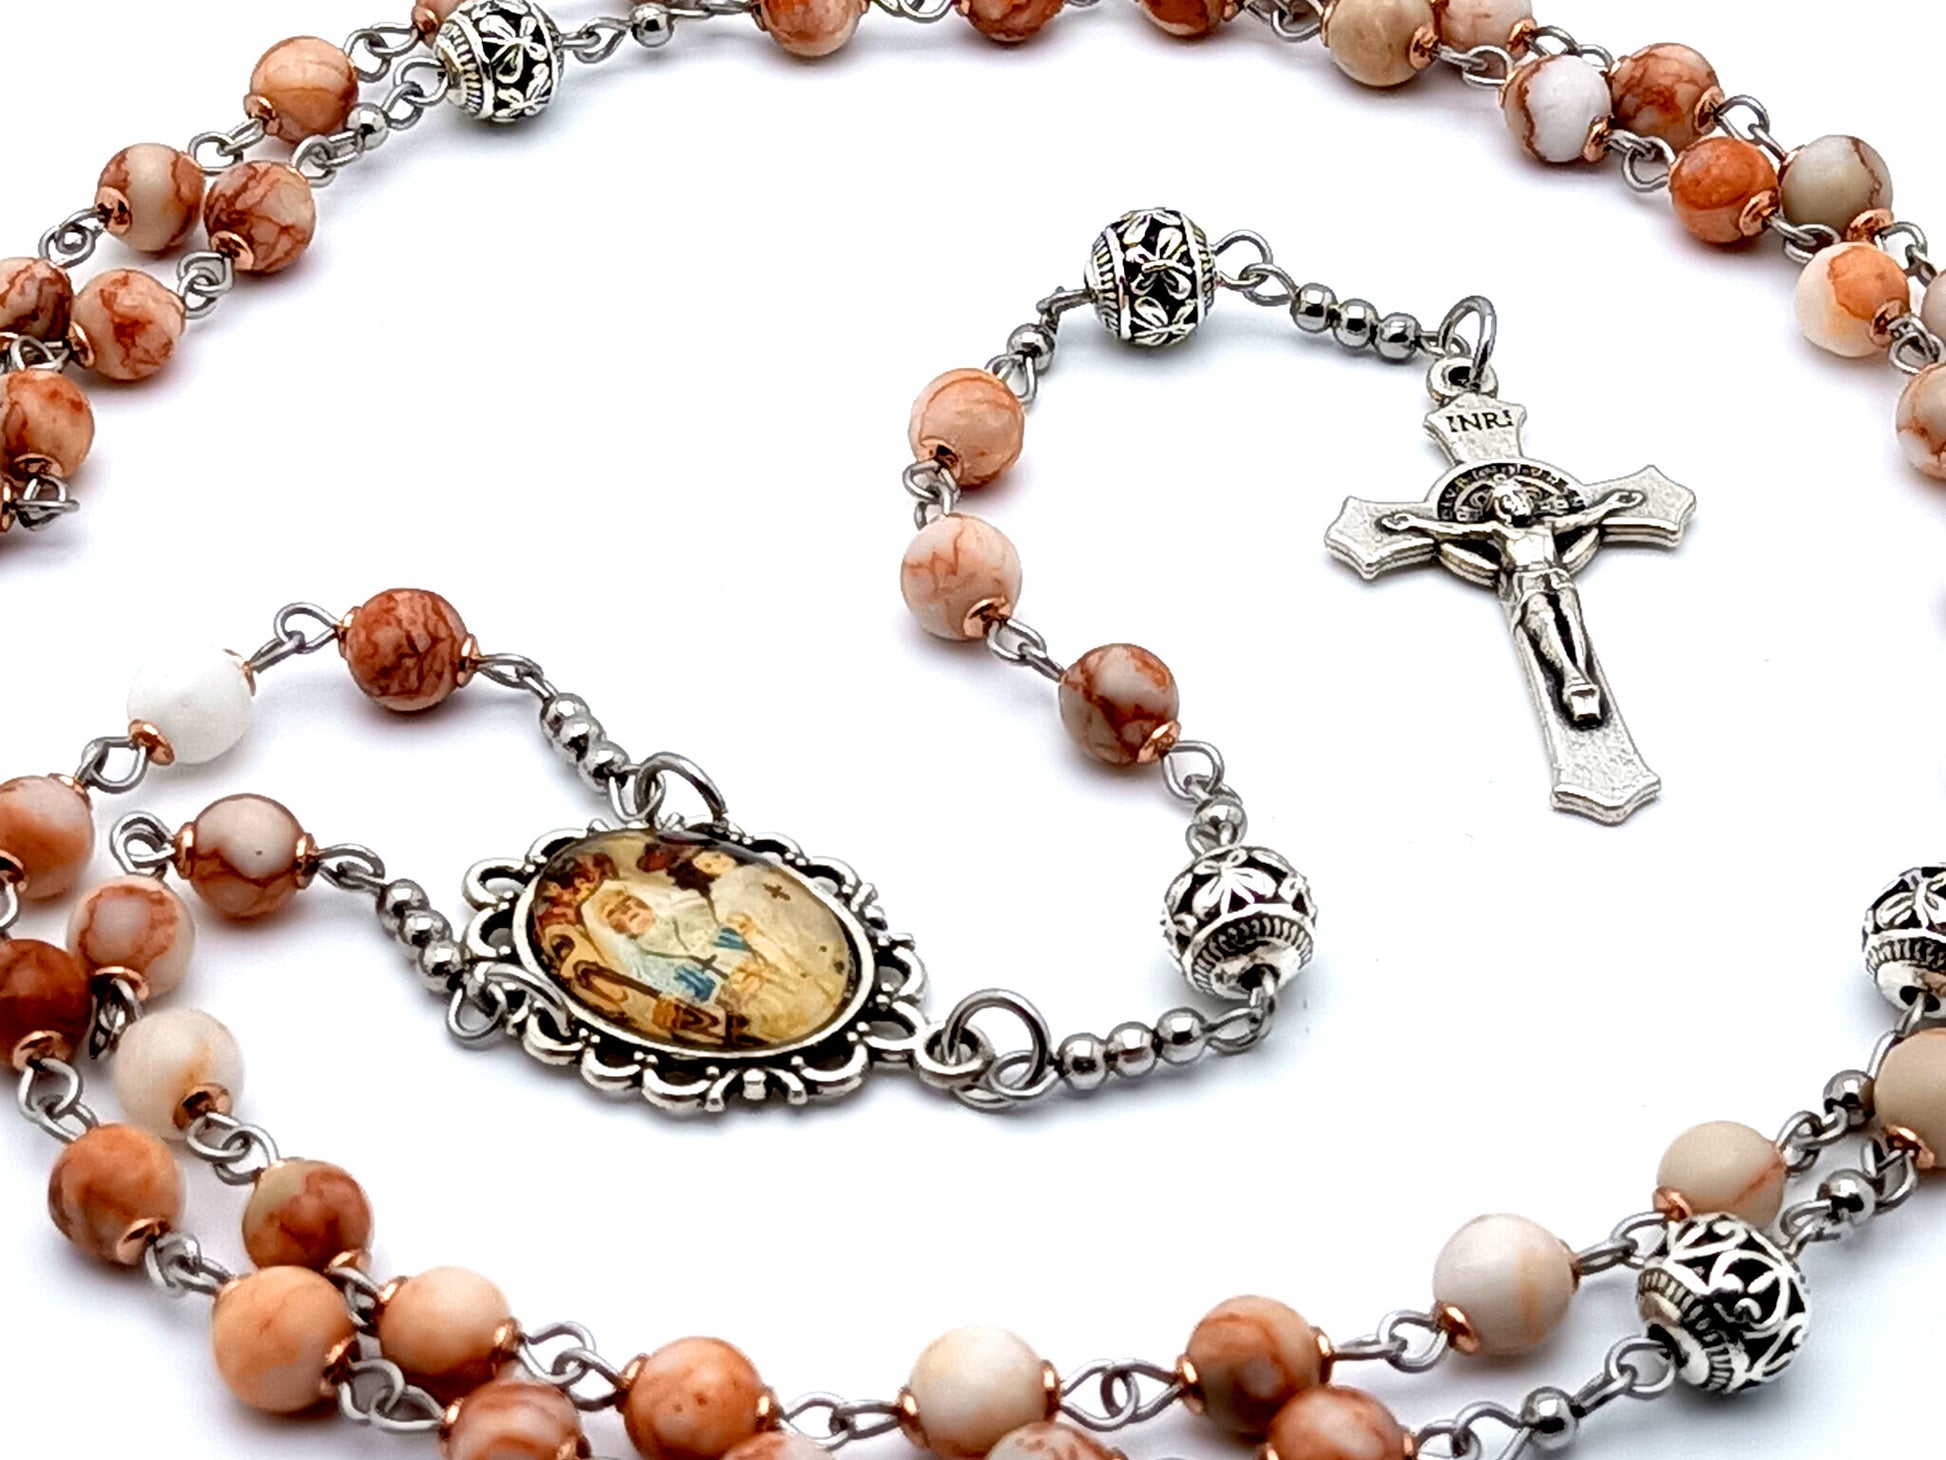 Our Lady of Good Success unique rosary beads with jasper gemstone and silver Our Father beads and Saint Benedict crucifix.